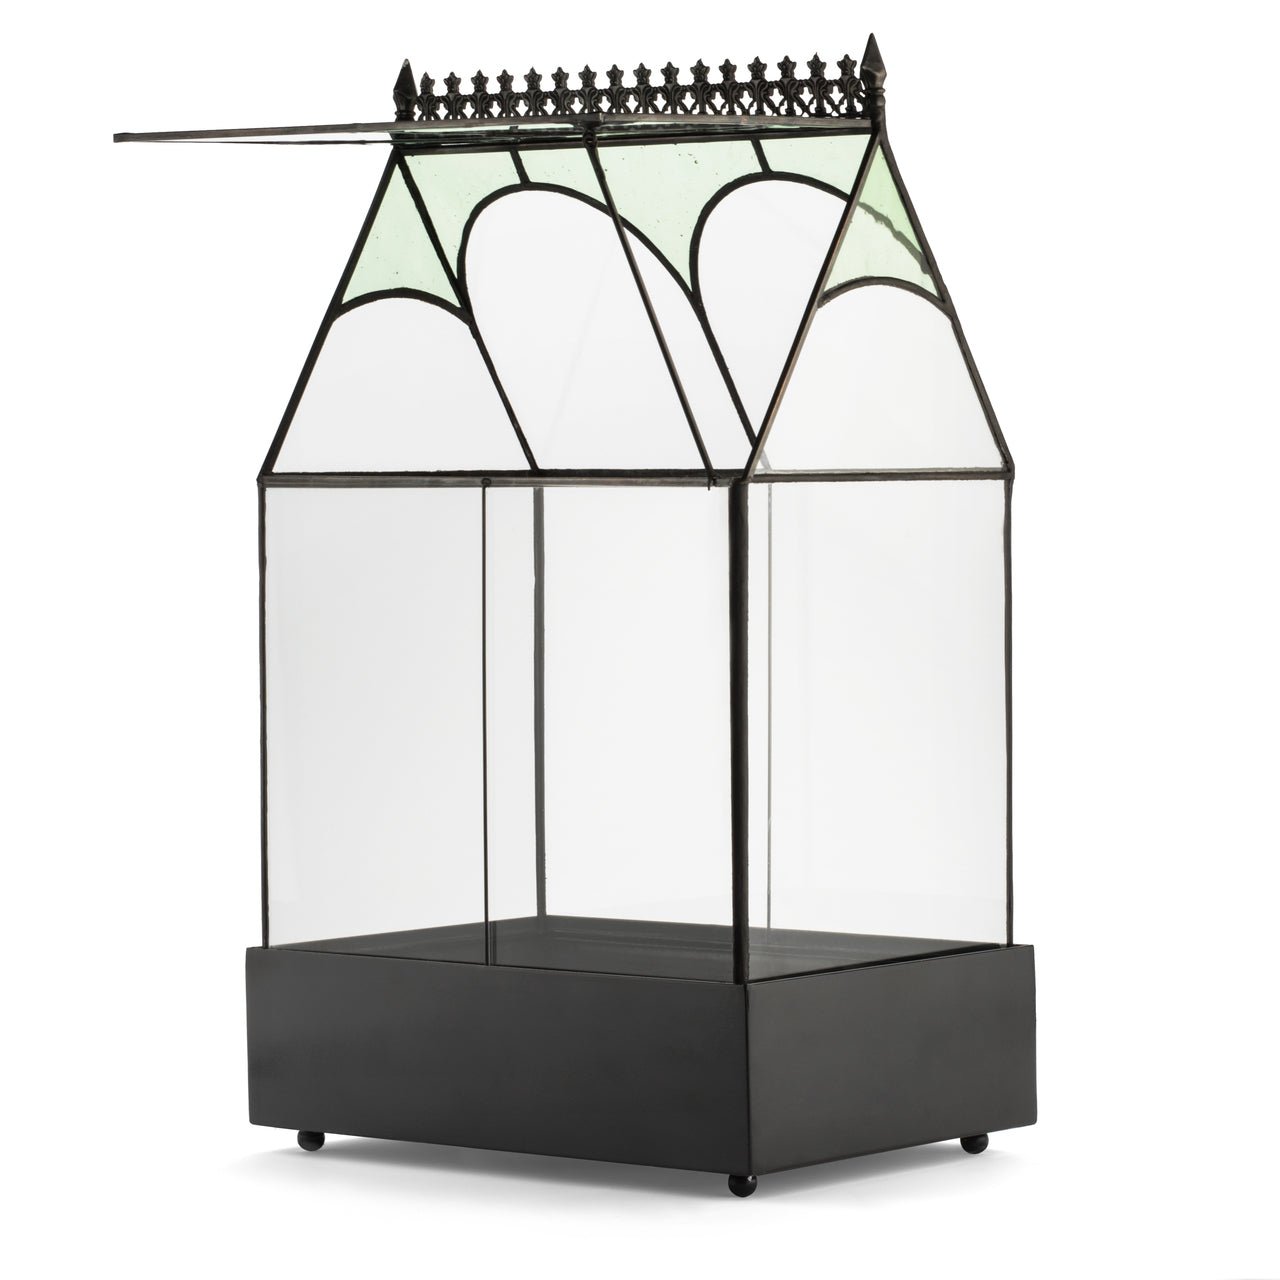 H Potter Wardian Case Terrarium Planter Container Glass Glasshouse Green Accent Glass Indoor Garden Greenhouse Orchids Moss